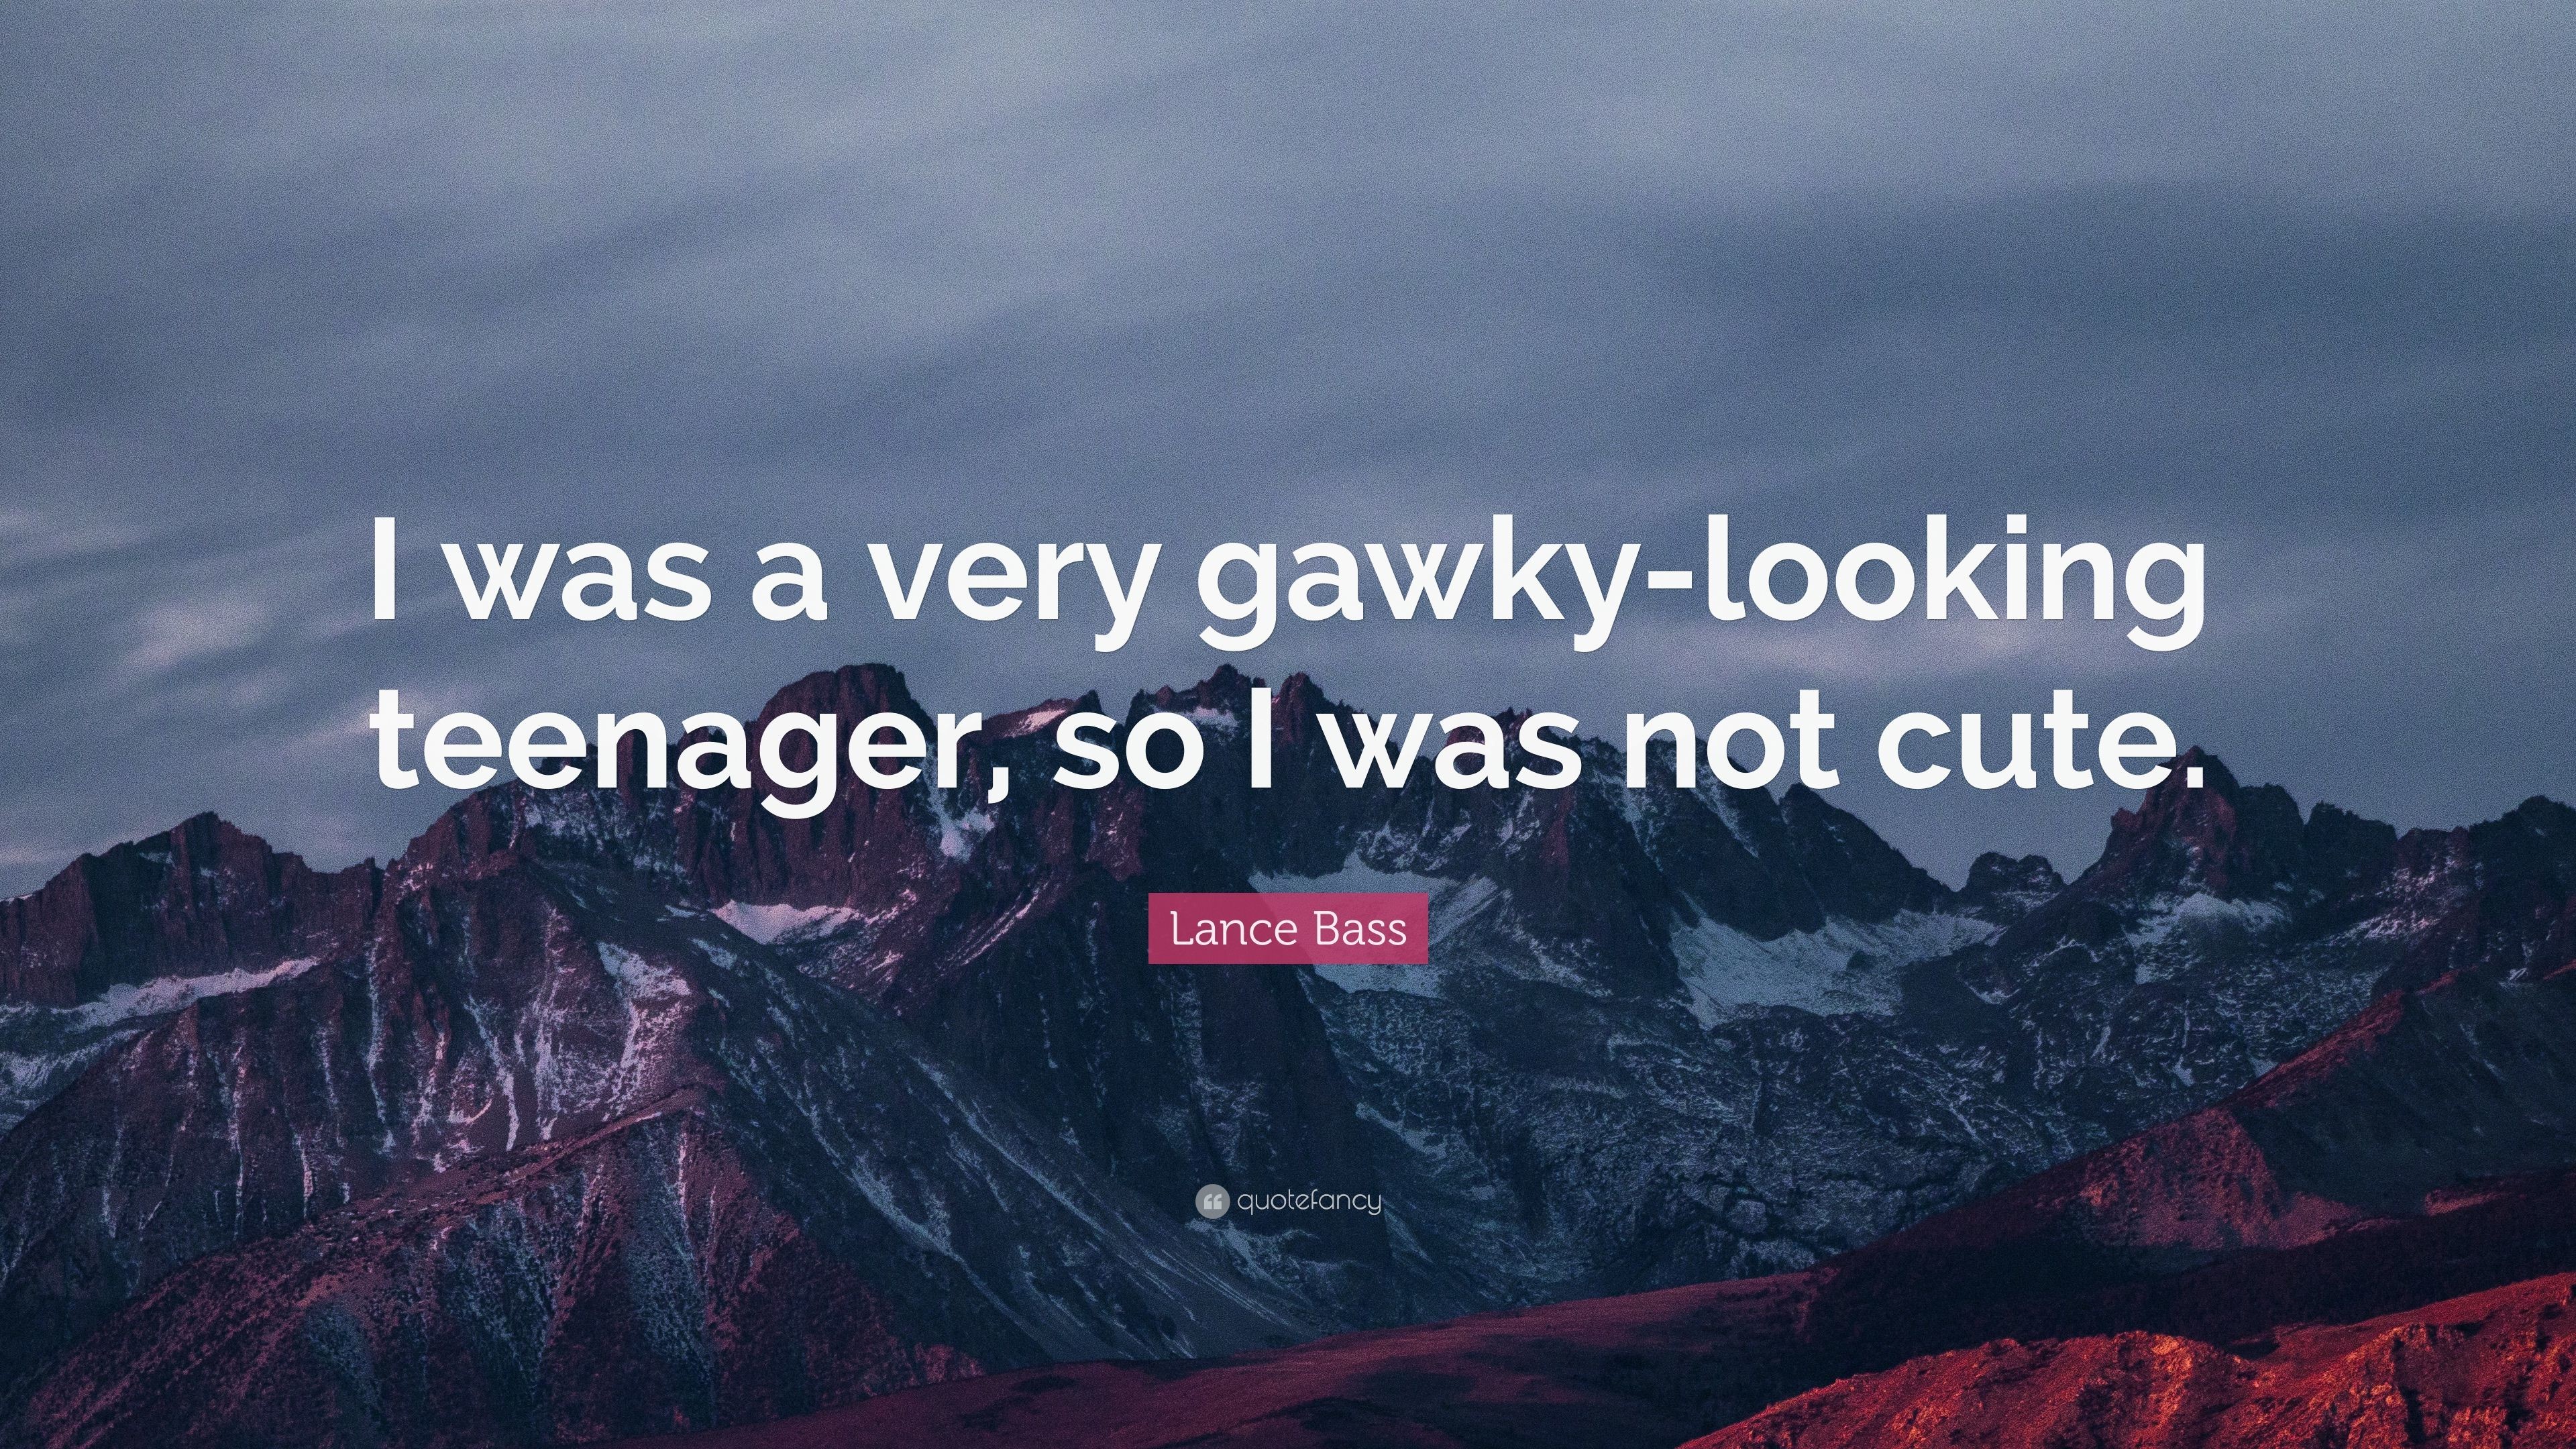 3840x2160 Lance Bass Quote: “I was a very gawky-looking teenager, so I